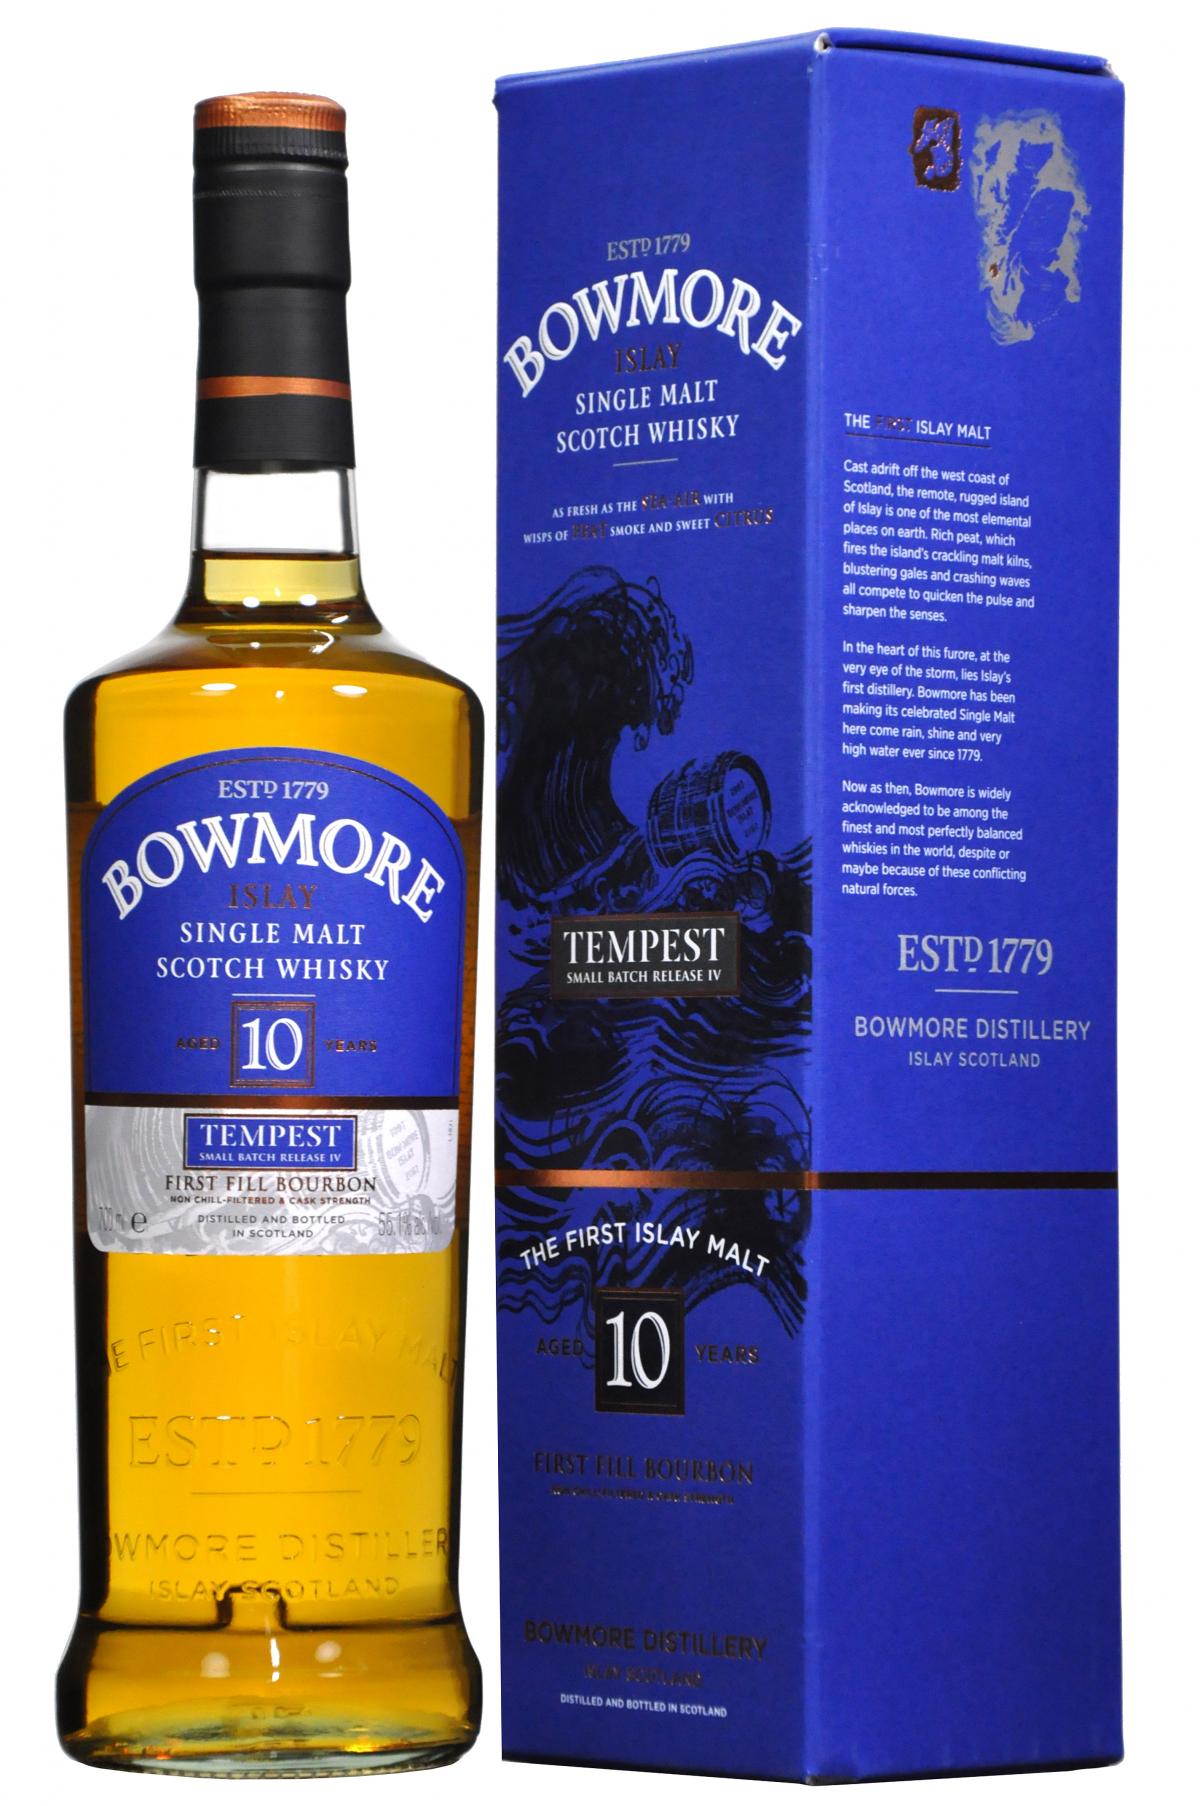 bowmore 10 year old, tempest batch iv 4, small batch release, islay single malt scoth whisky